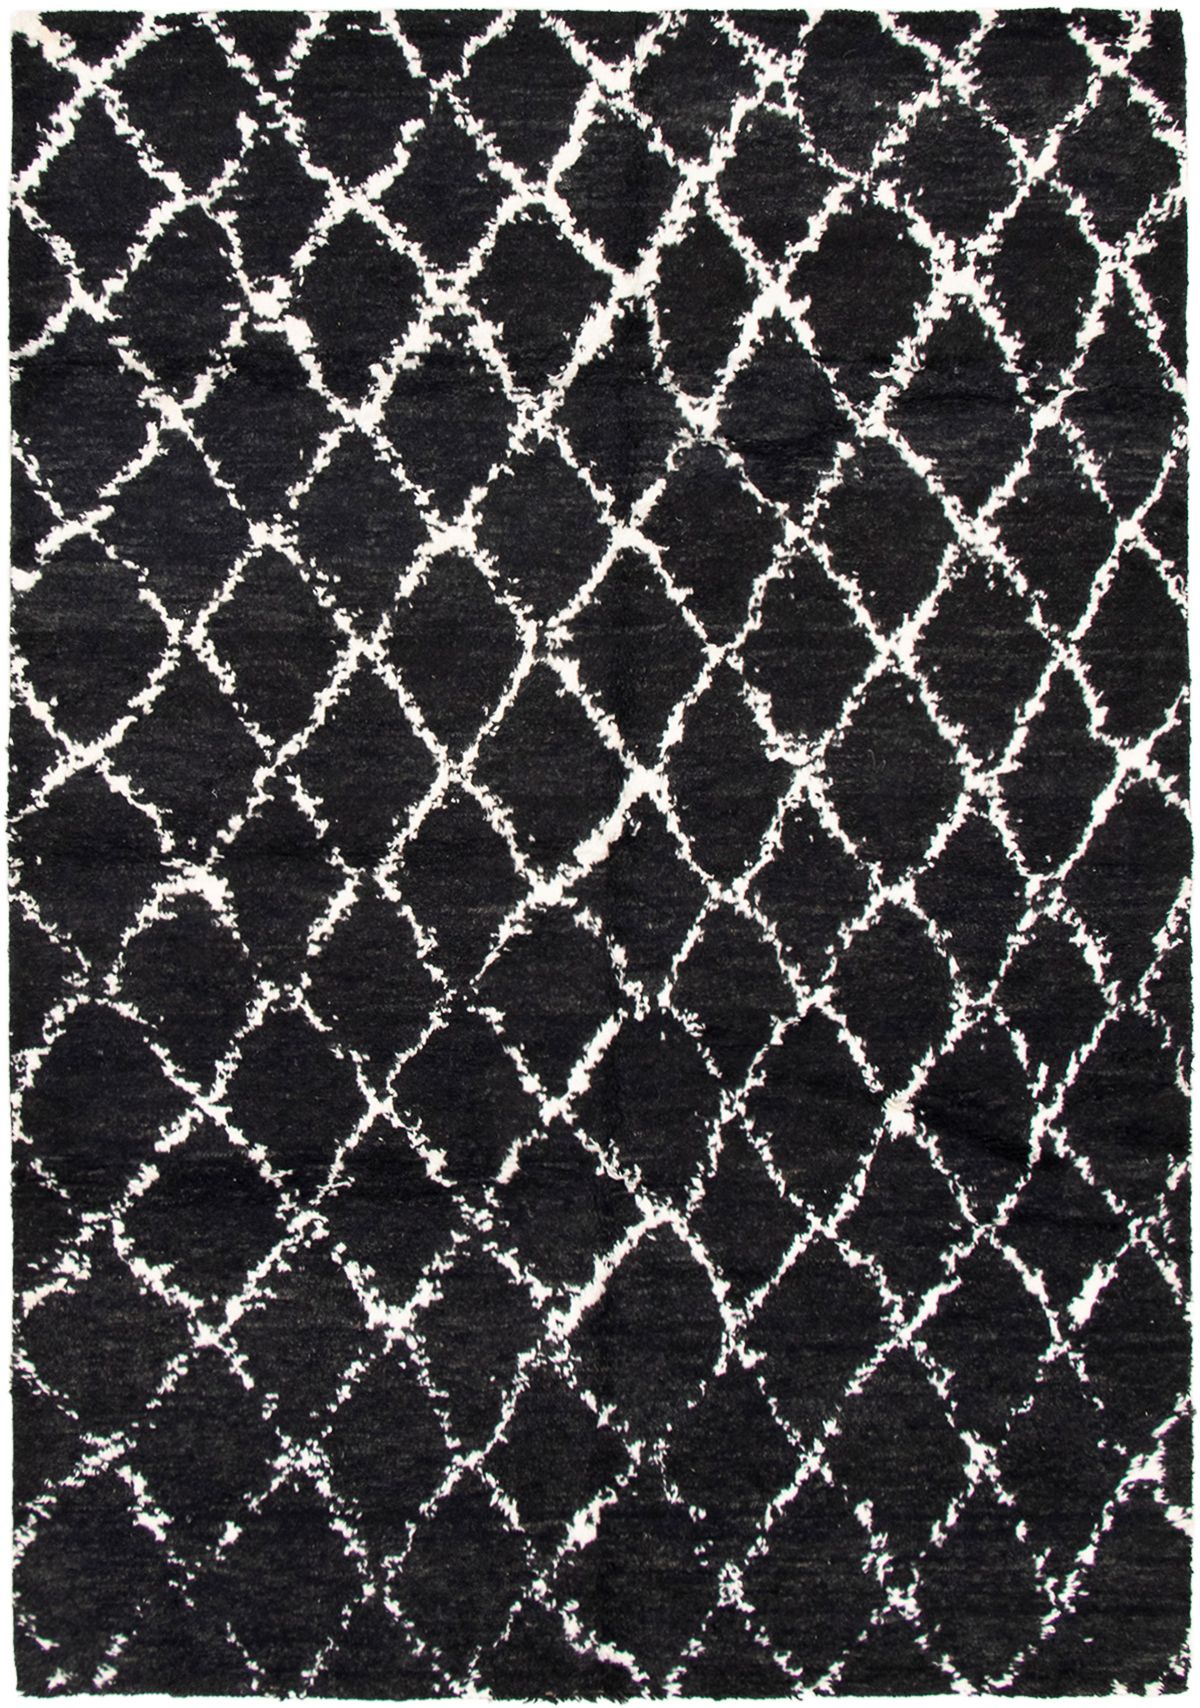 Hand-knotted Arlequin Black Wool Rug 6'0" x 9'0"  Size: 6'0" x 9'0"  